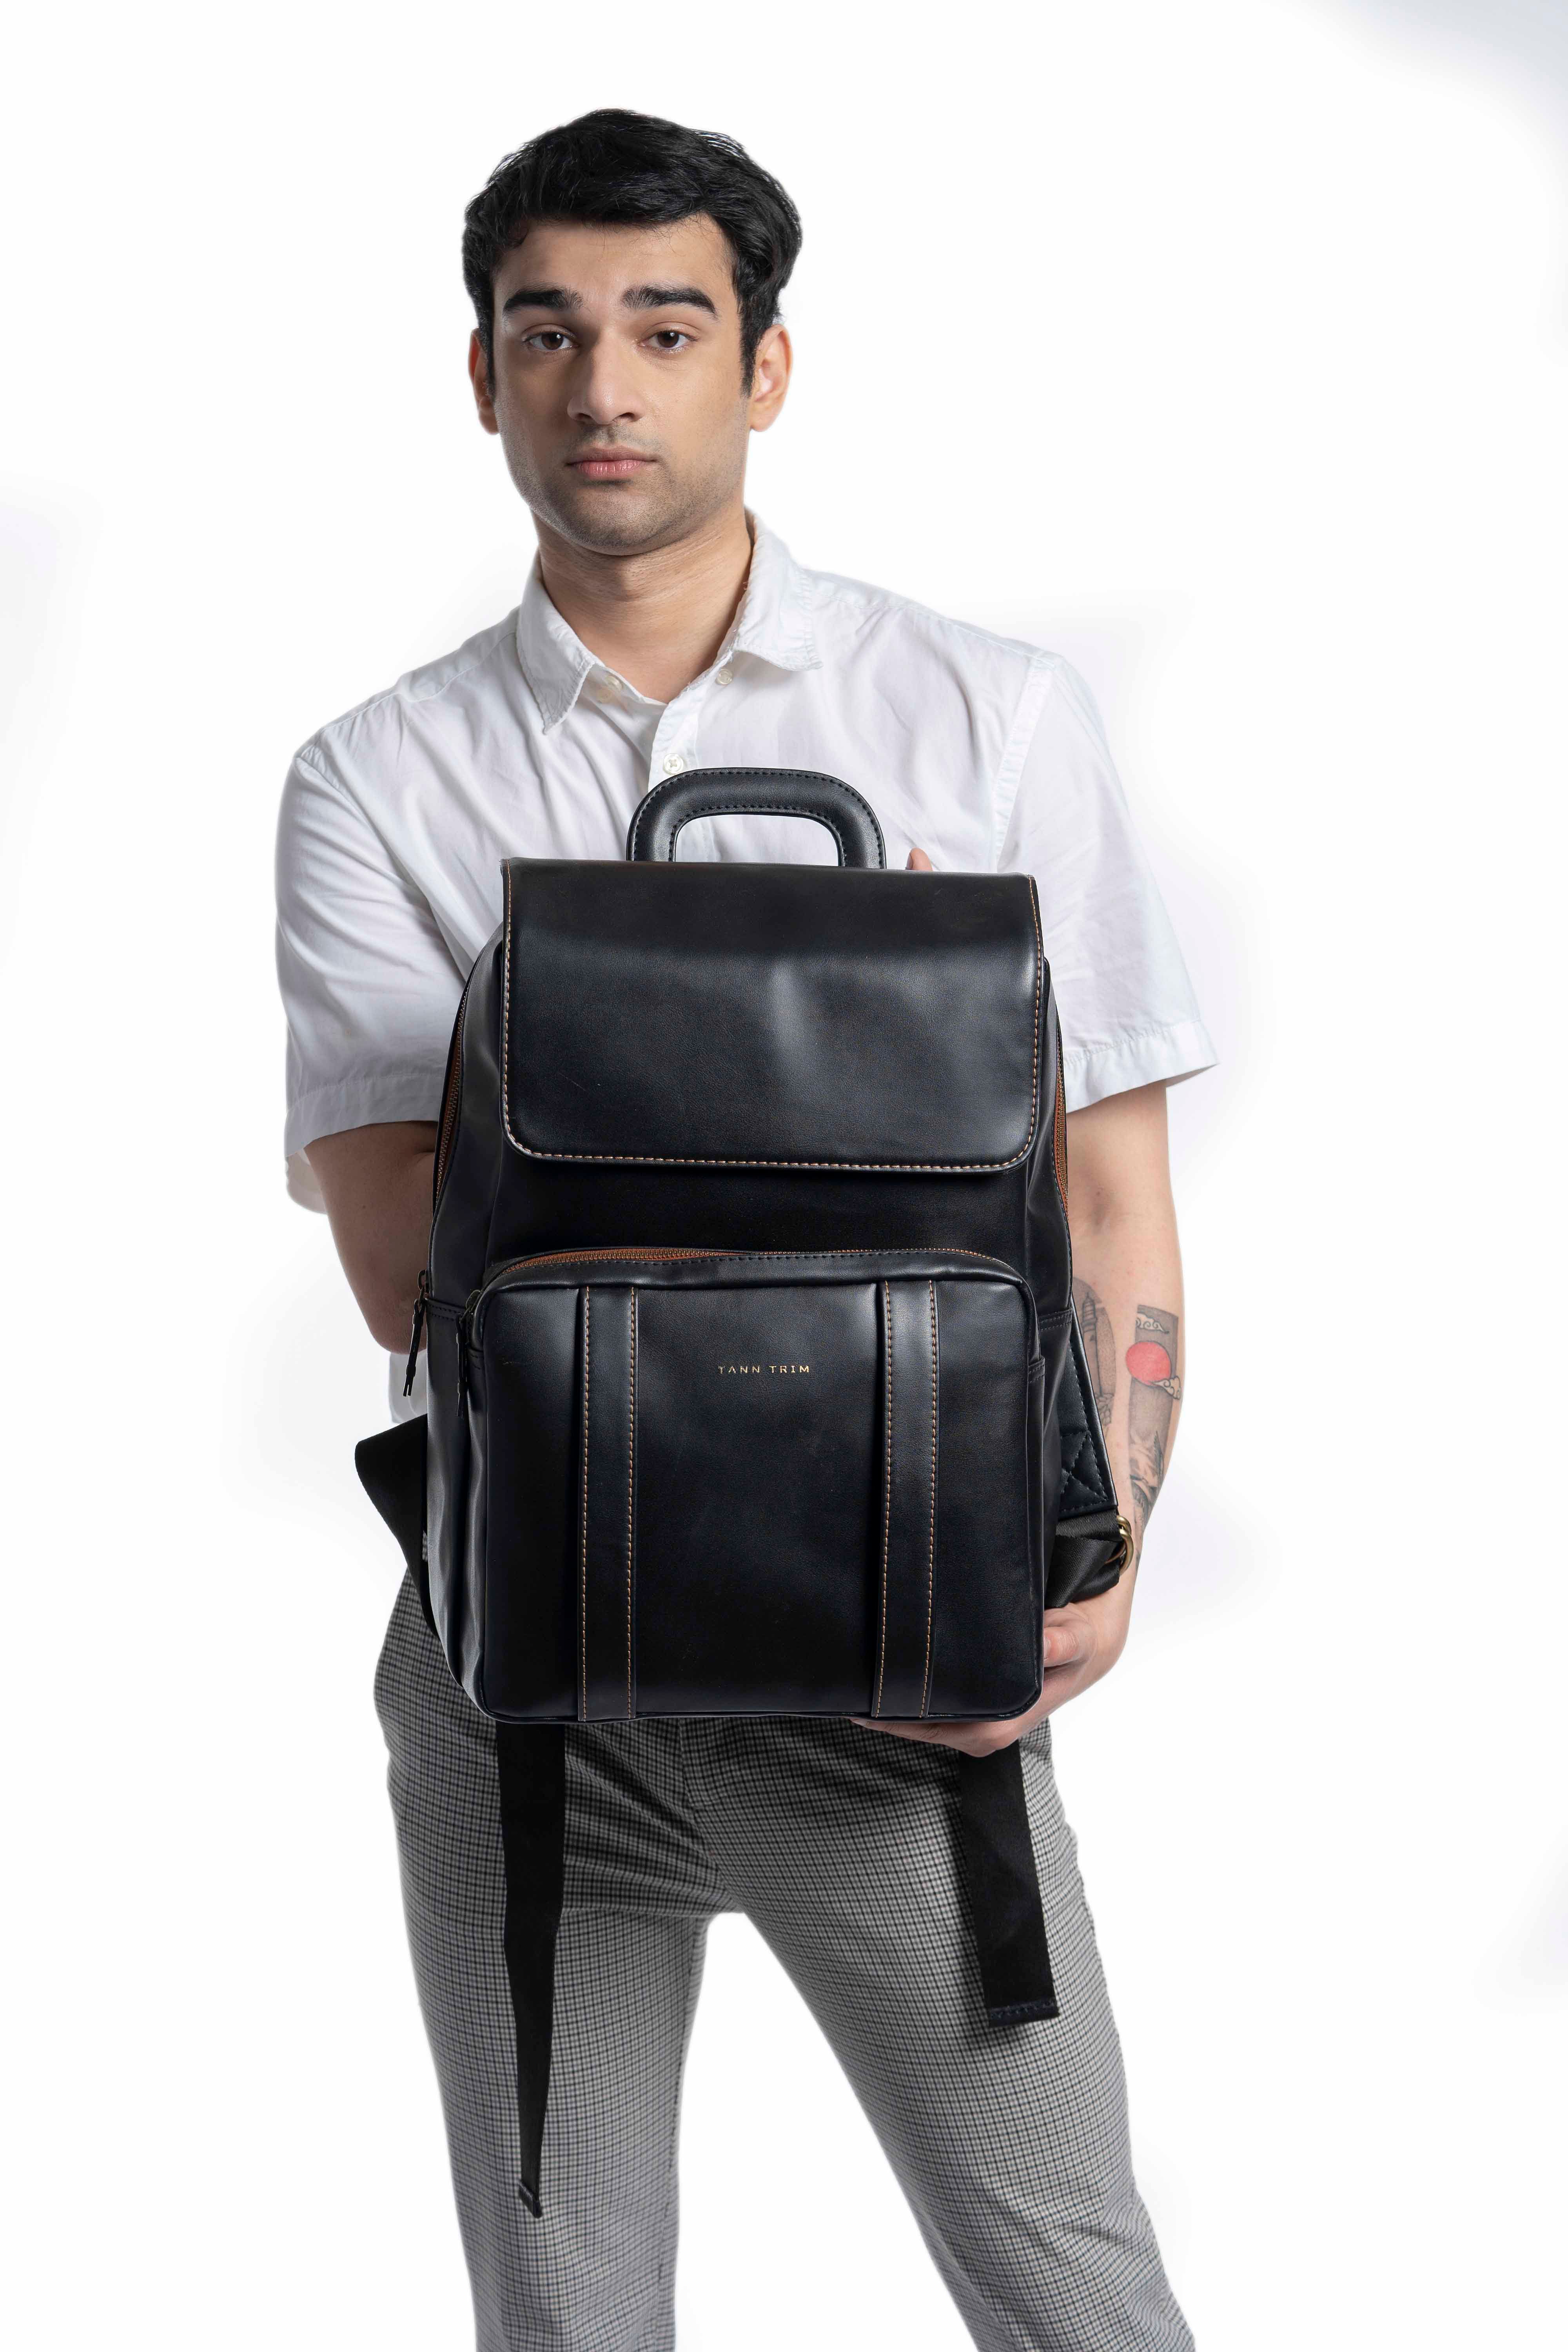 The Metro Movers Black Backpack